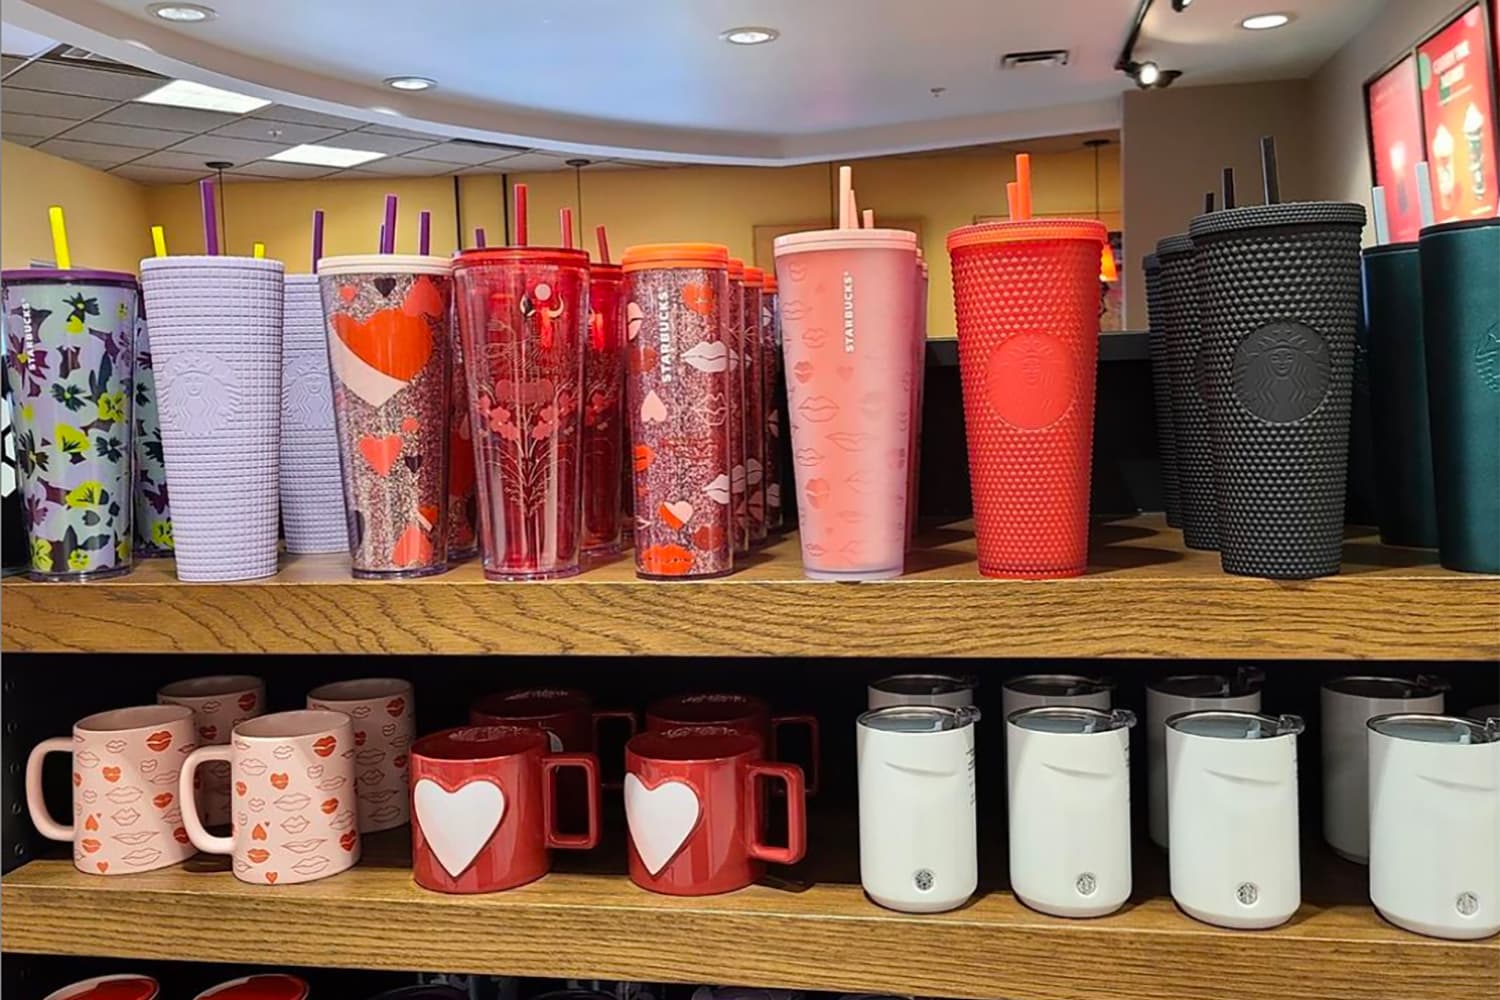 Here's All the Starbucks Valentine Cups for 2021 - Let's Eat Cake